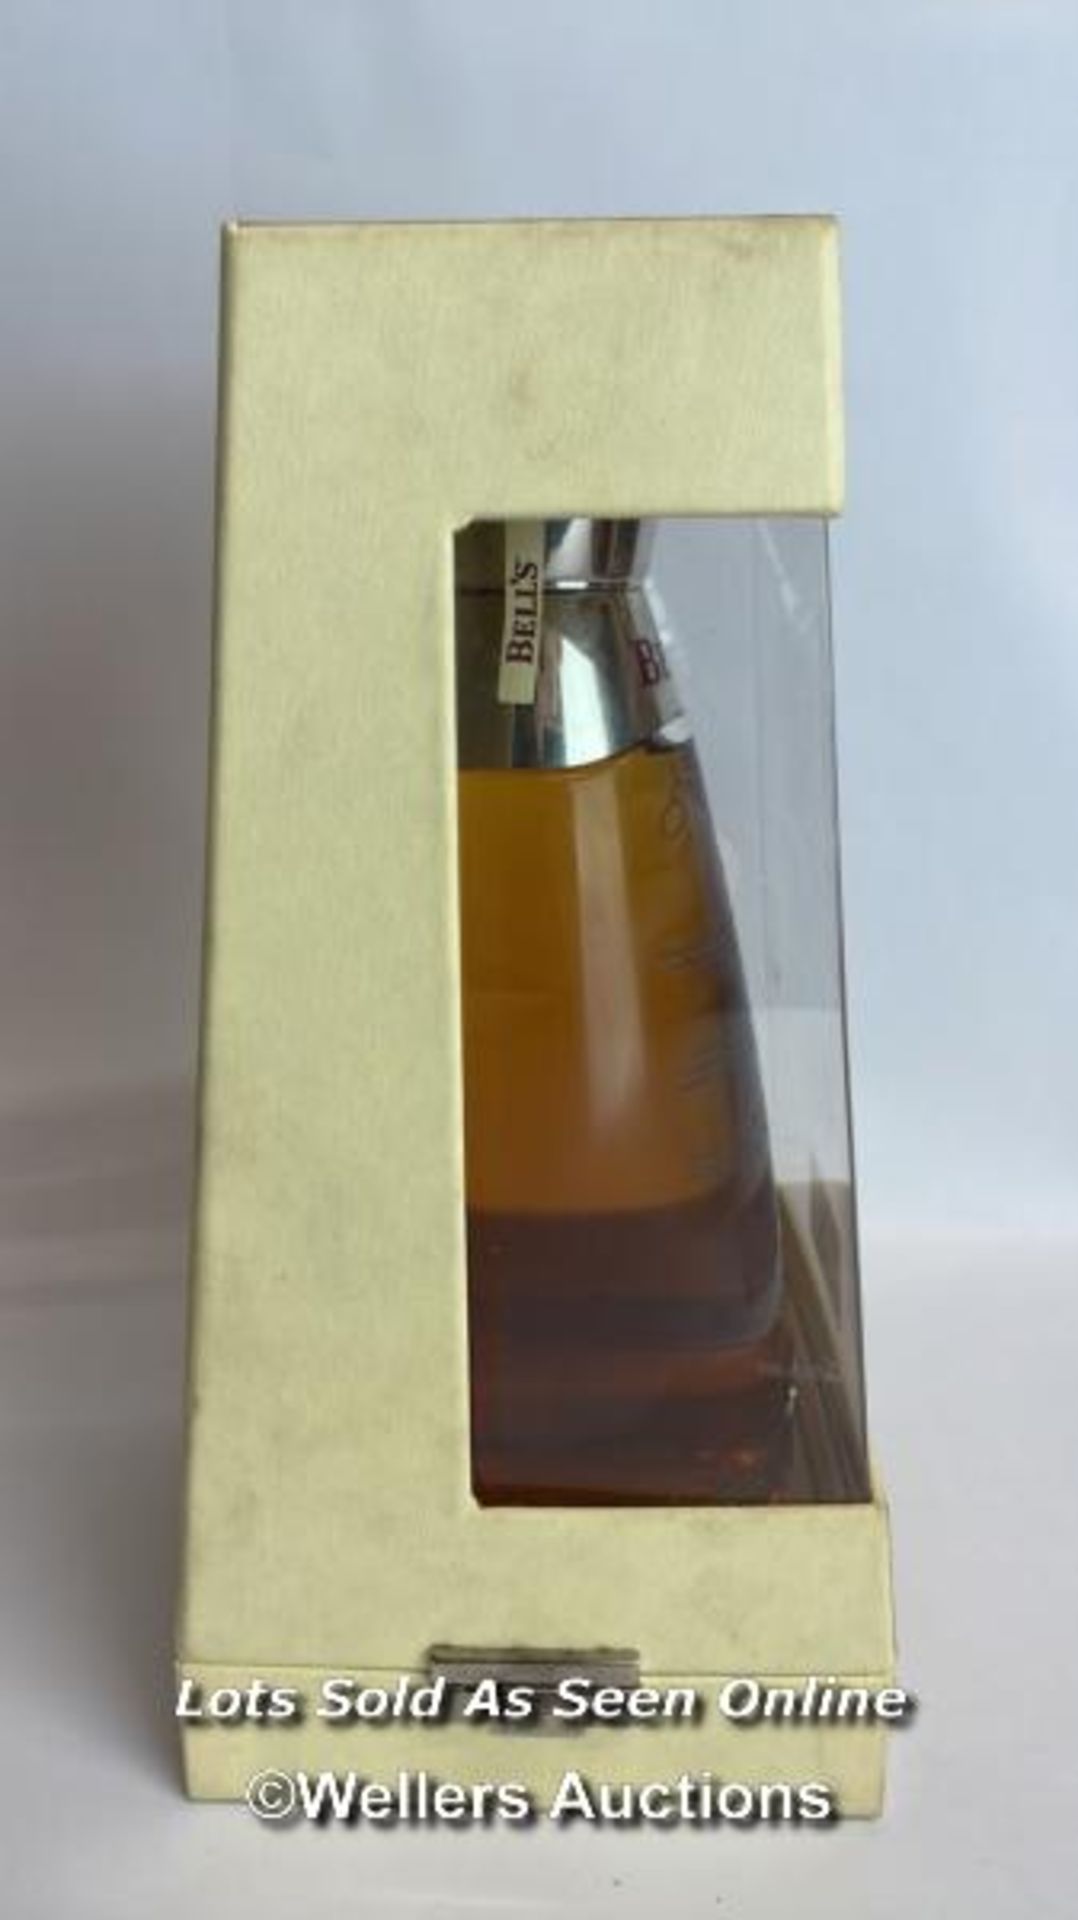 Bell's Extra Special 2000 Millenium Water of Life Whisky, Aged 8 Years, 70cl, 40% vol, In original - Image 9 of 10